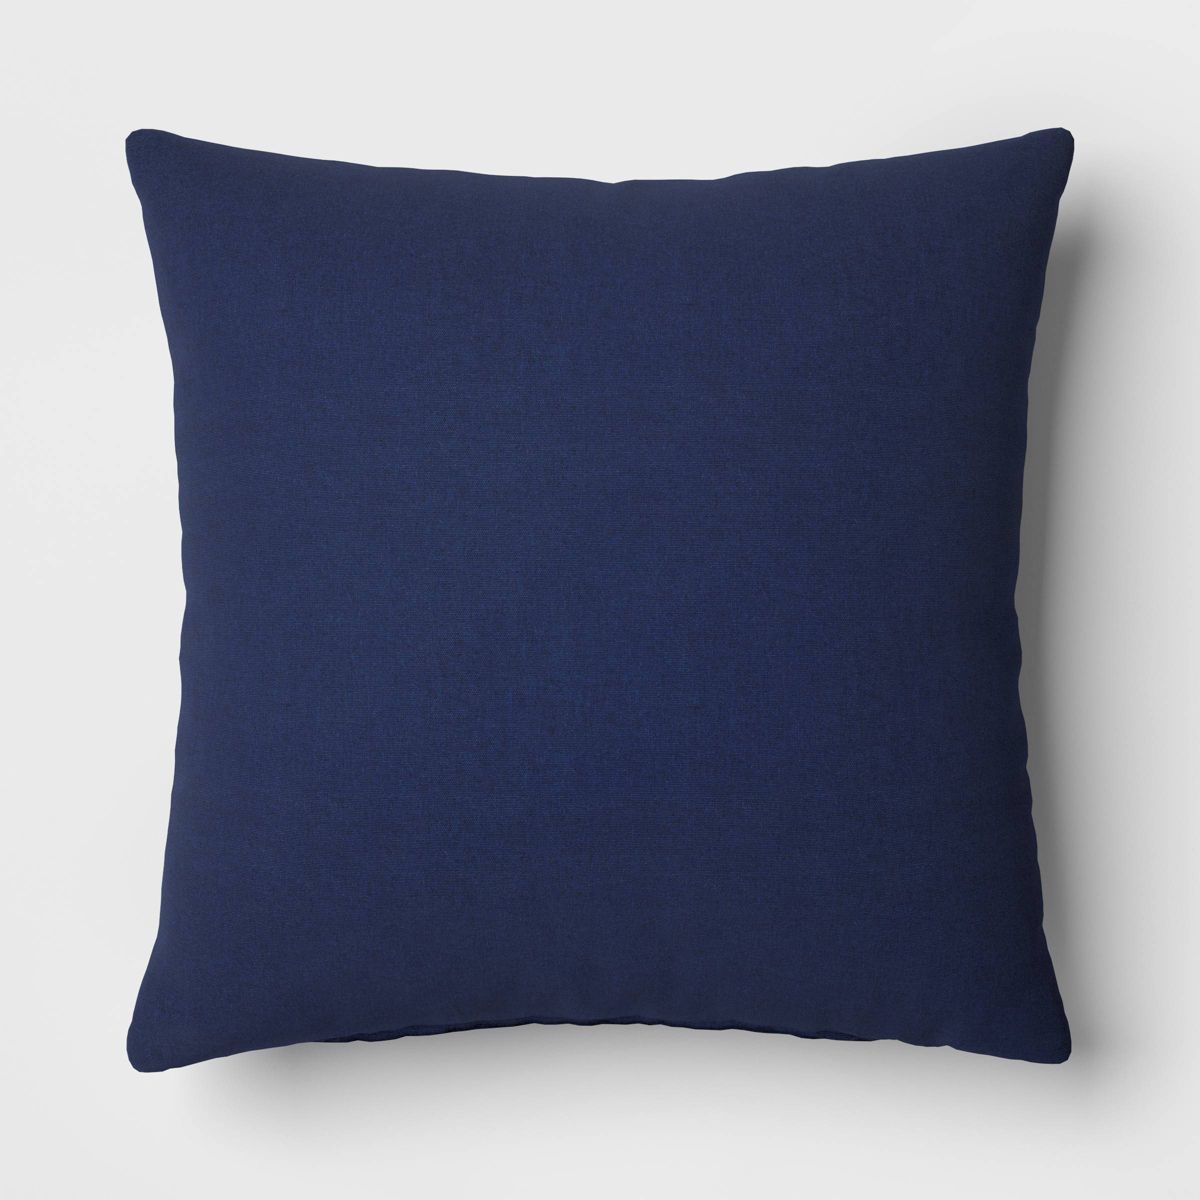 18"x18" Solid Woven Square Outdoor Throw Pillow Navy - Threshold™ | Target